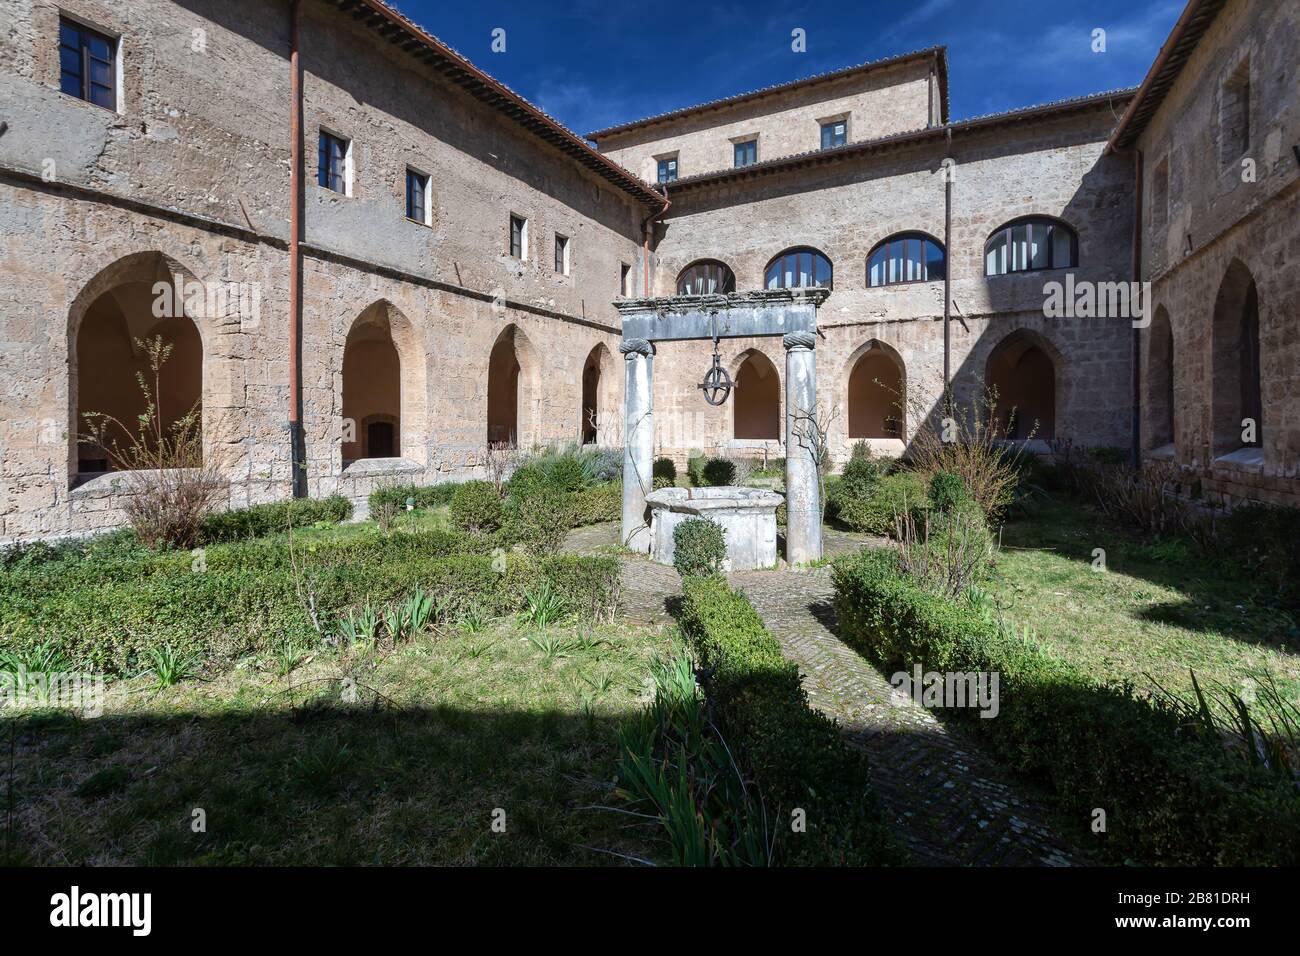 Subiaco, Italy - February 23, 2020: Monastery of Santa Scolastica - the ancient well from inside the cloister. Stock Photo